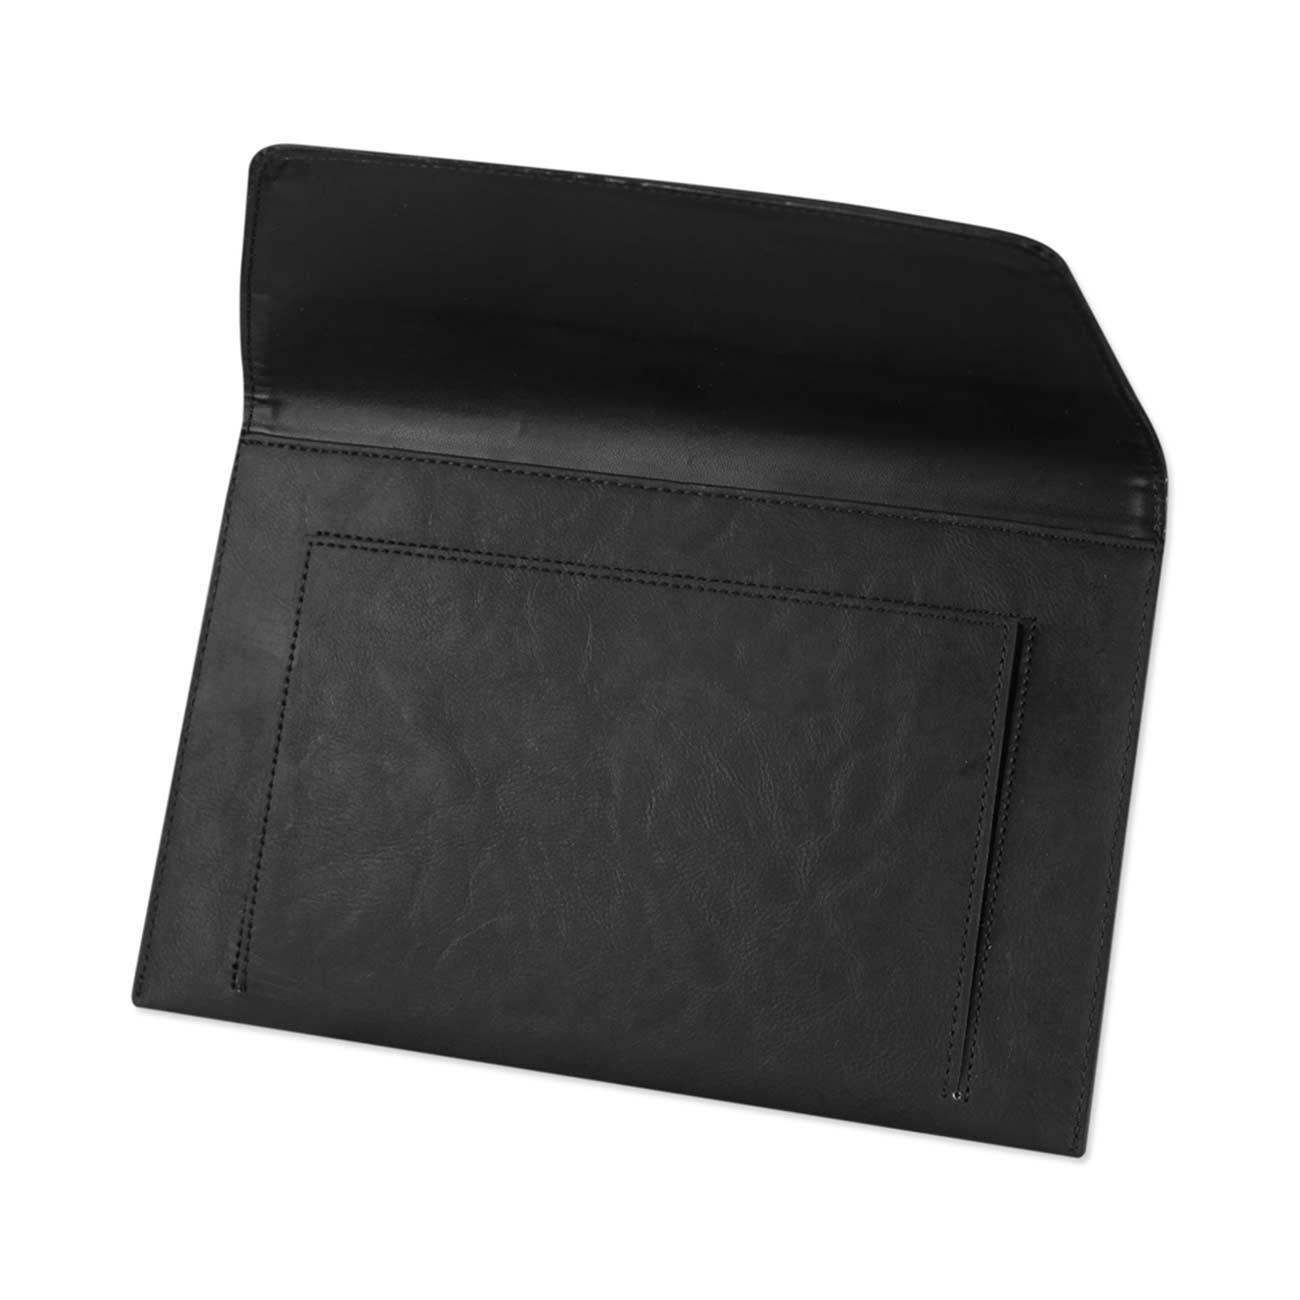 REIKO PREMIUM LEATHER CASE POUCH FOR 7INCHES IPADS AND TABLETS In BLACK